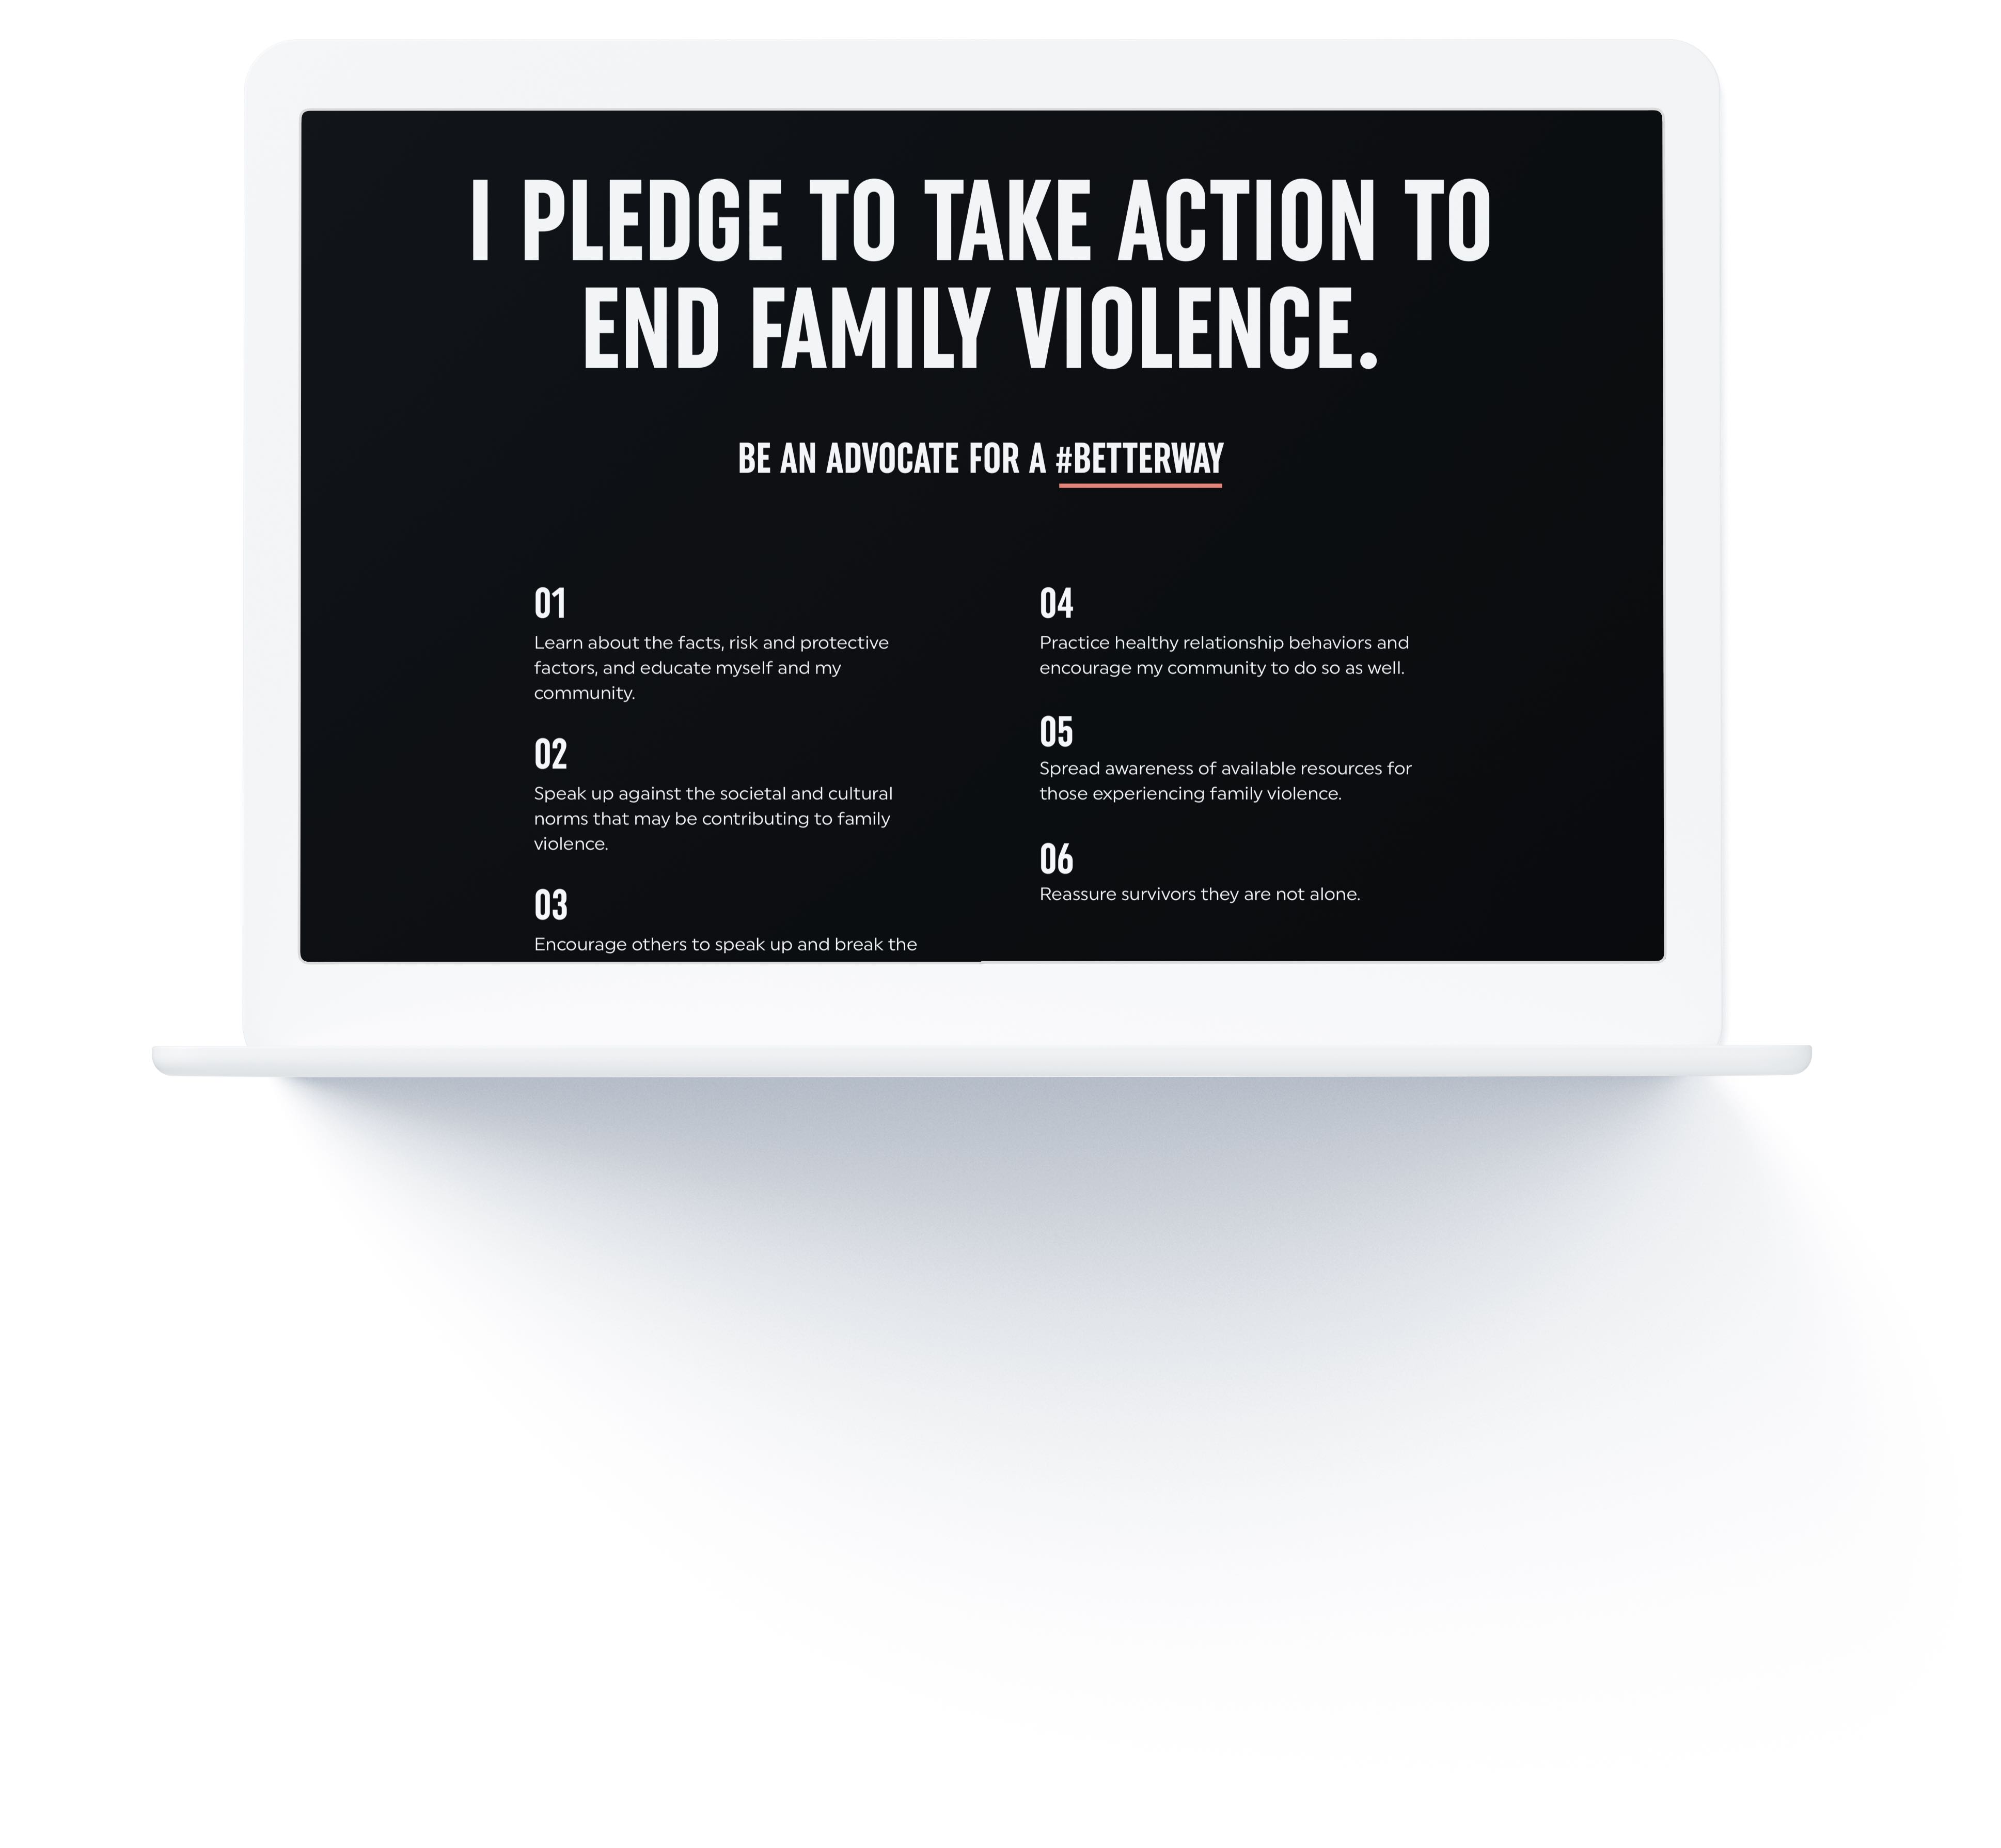 Computer mockup of the Family Violence campaign #BETTERWAY pledge